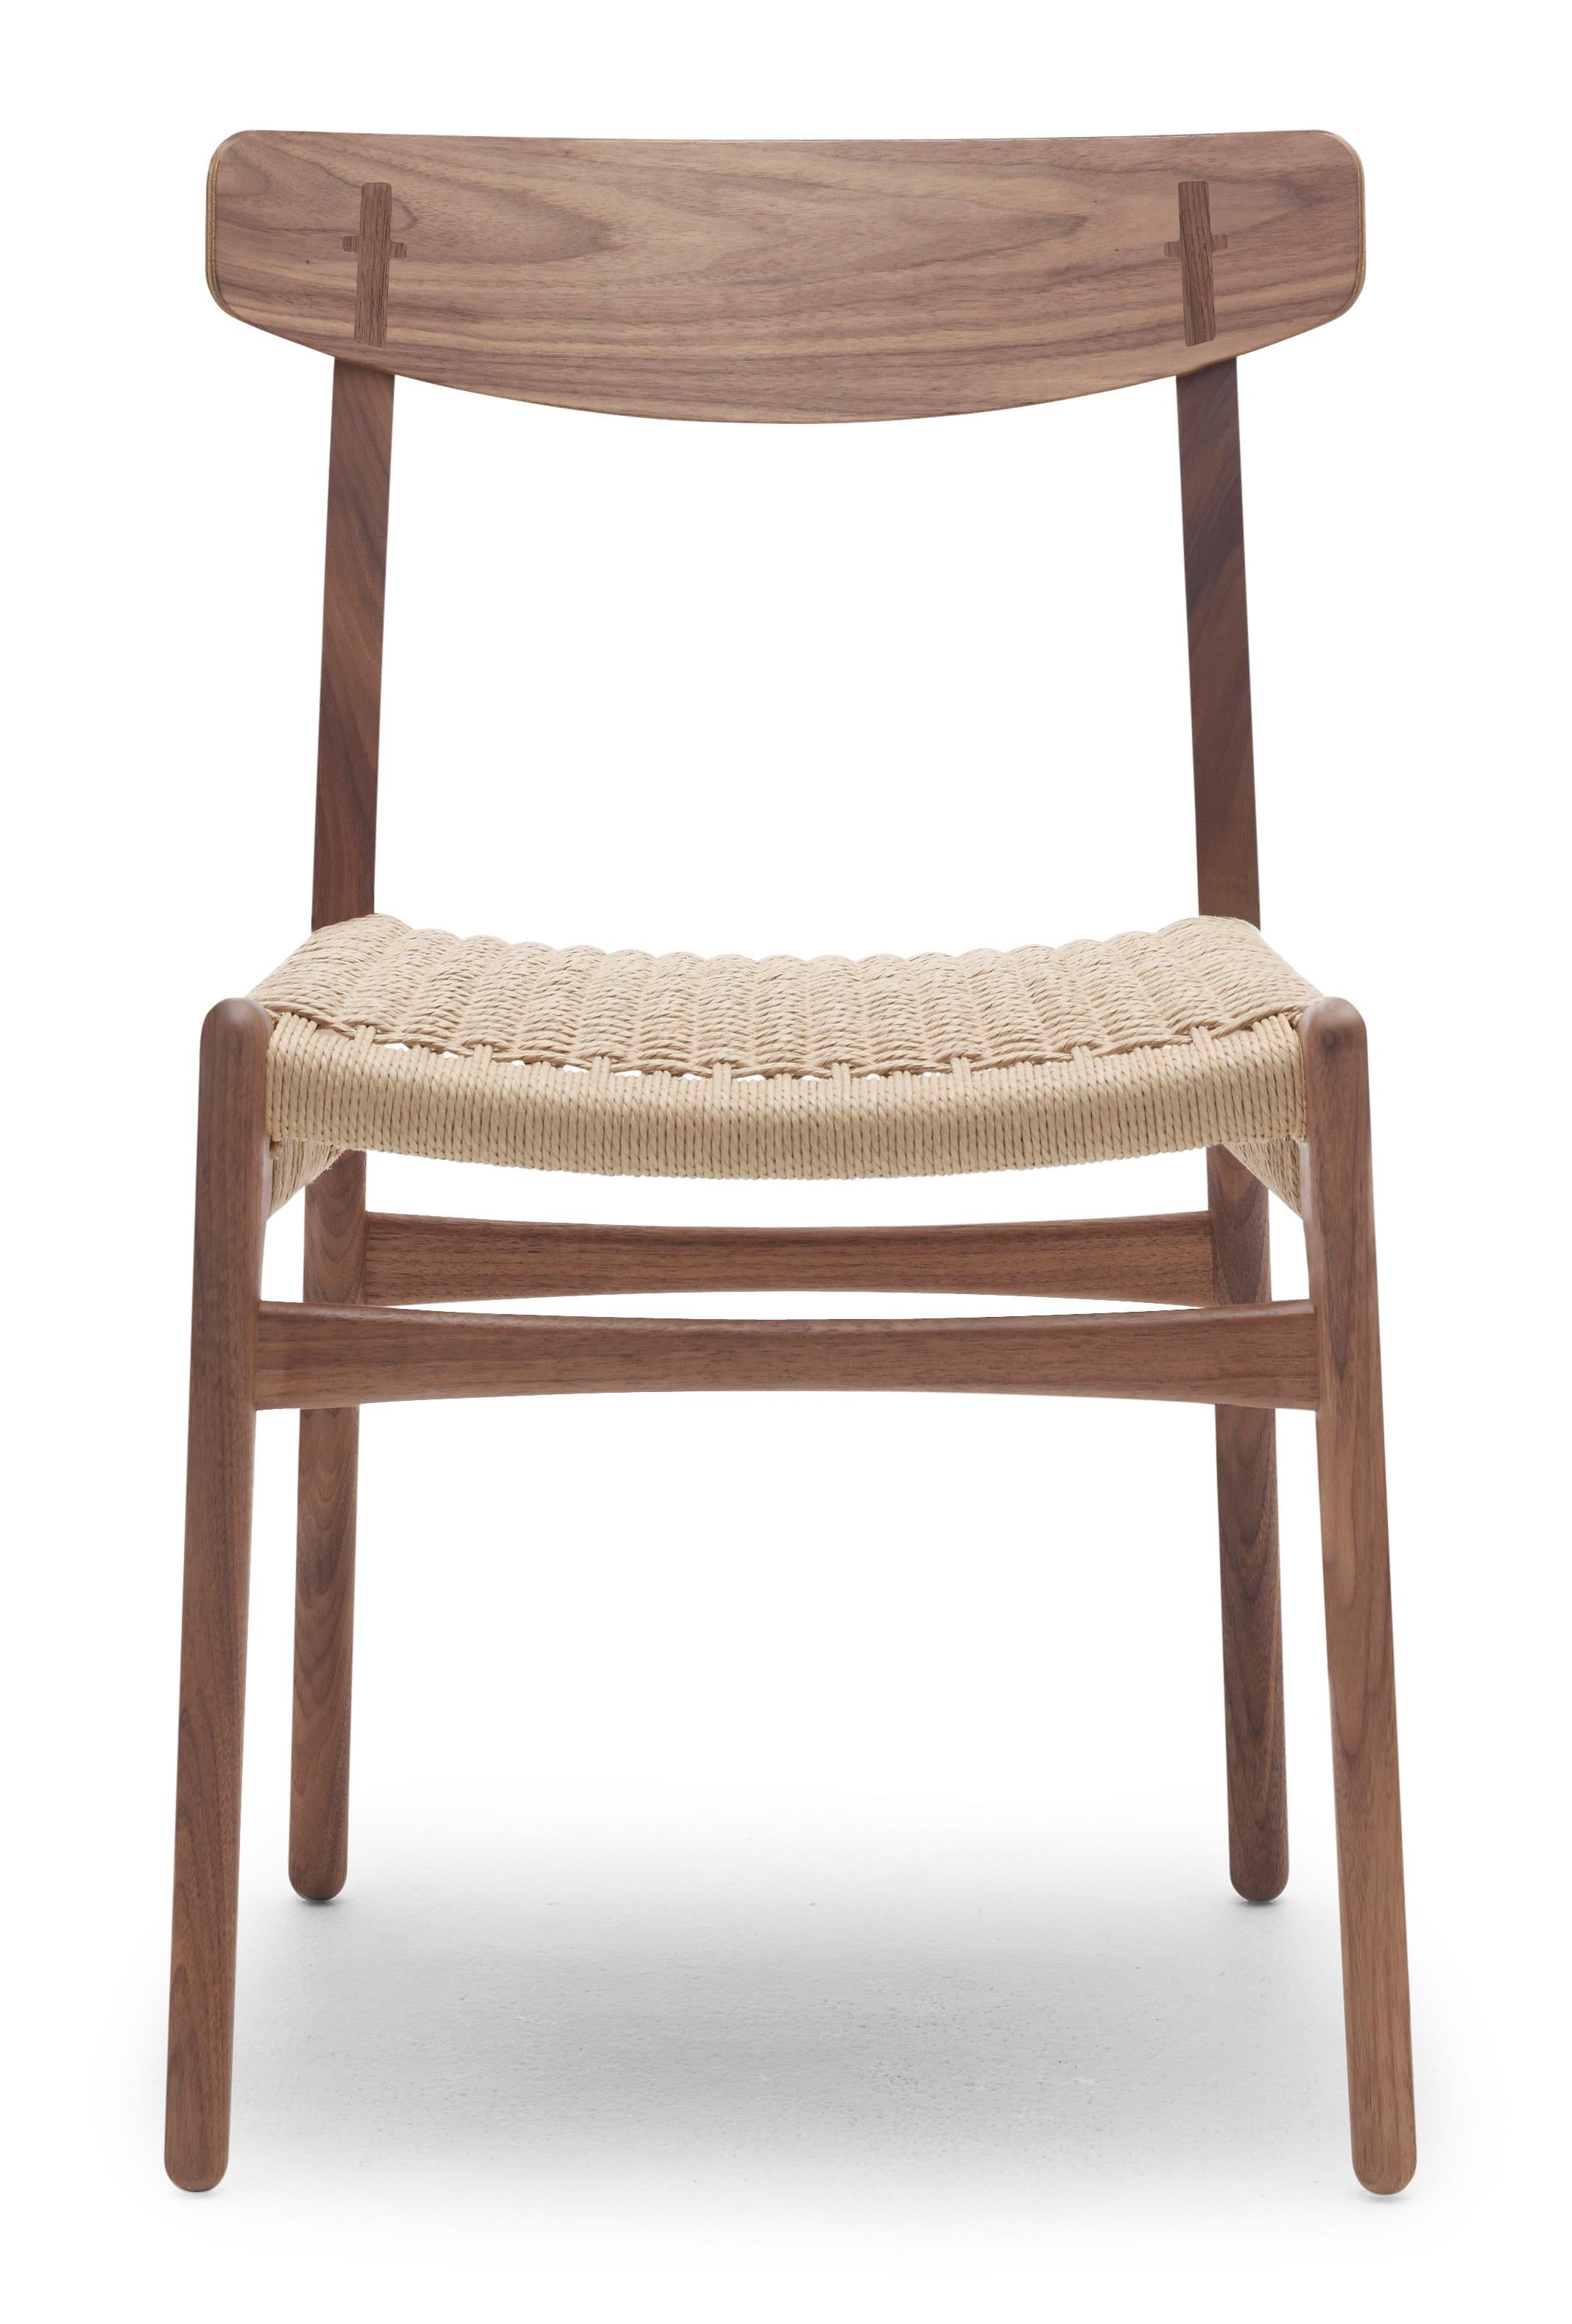 Brown (Walnut Oil) CH23 Dining Chair in Wood Finishes with Natural Papercord Seat by Hans J. Wegner